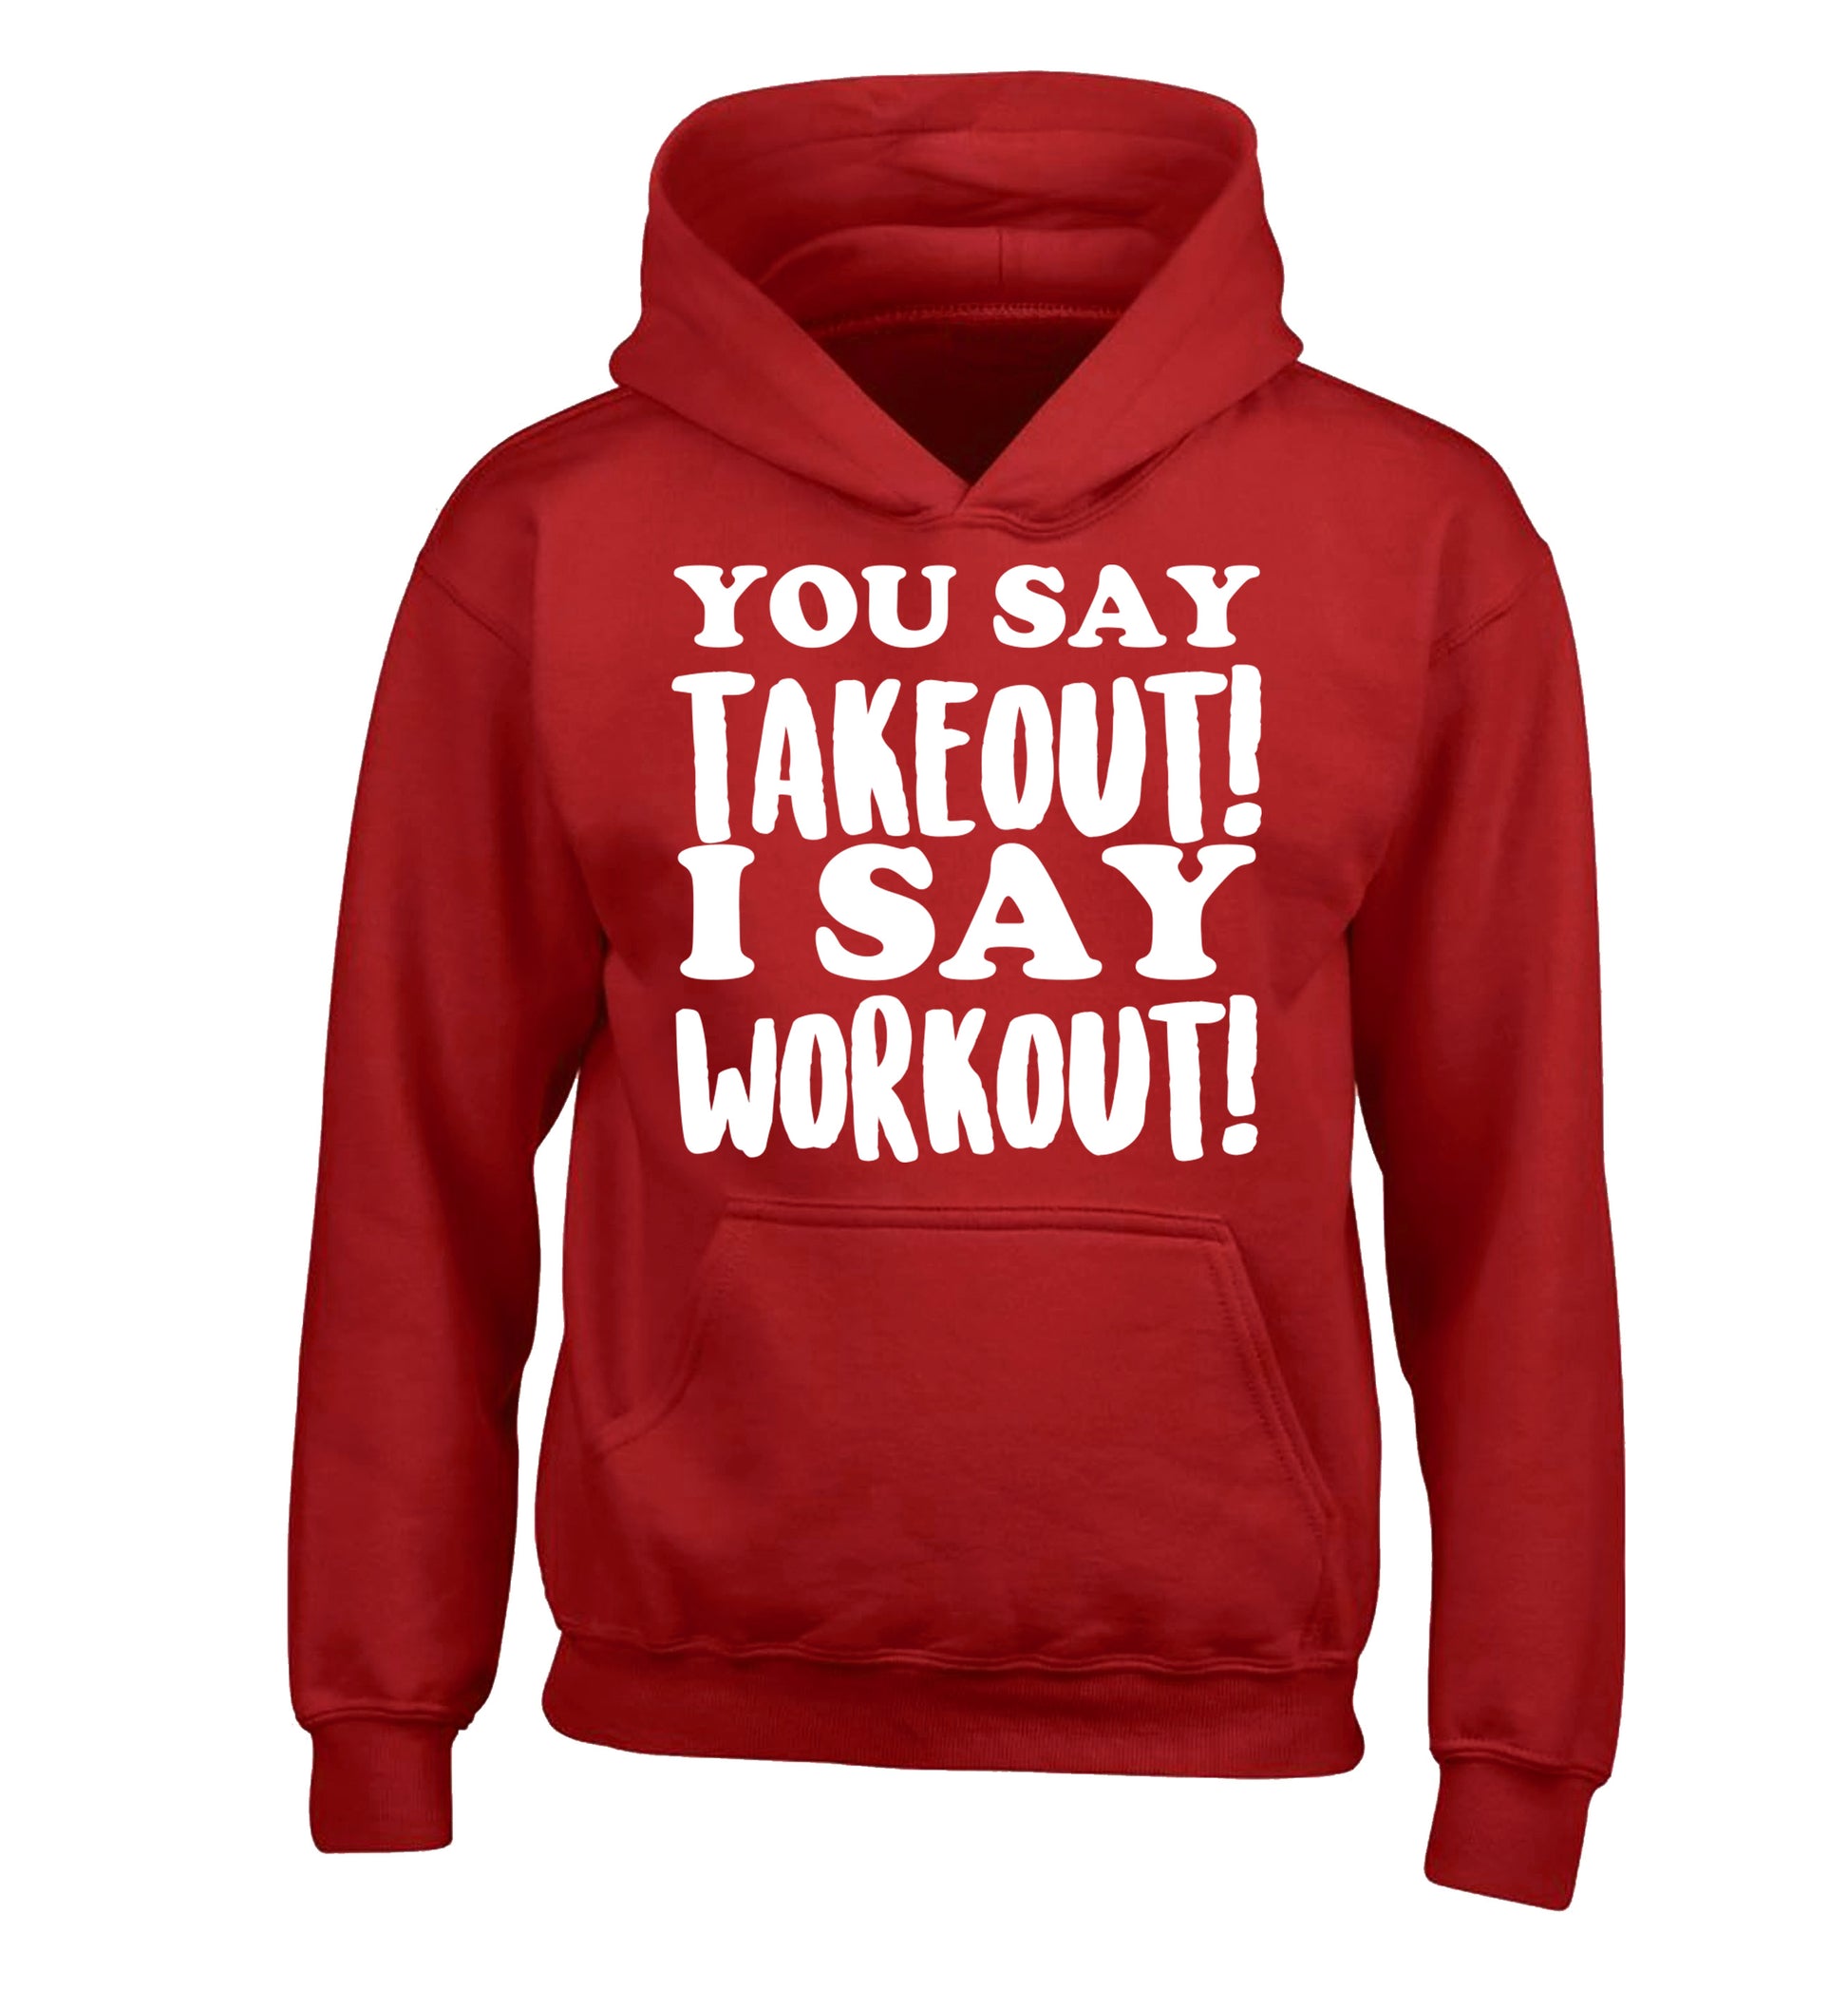 You say takeout I say workout! children's red hoodie 12-14 Years